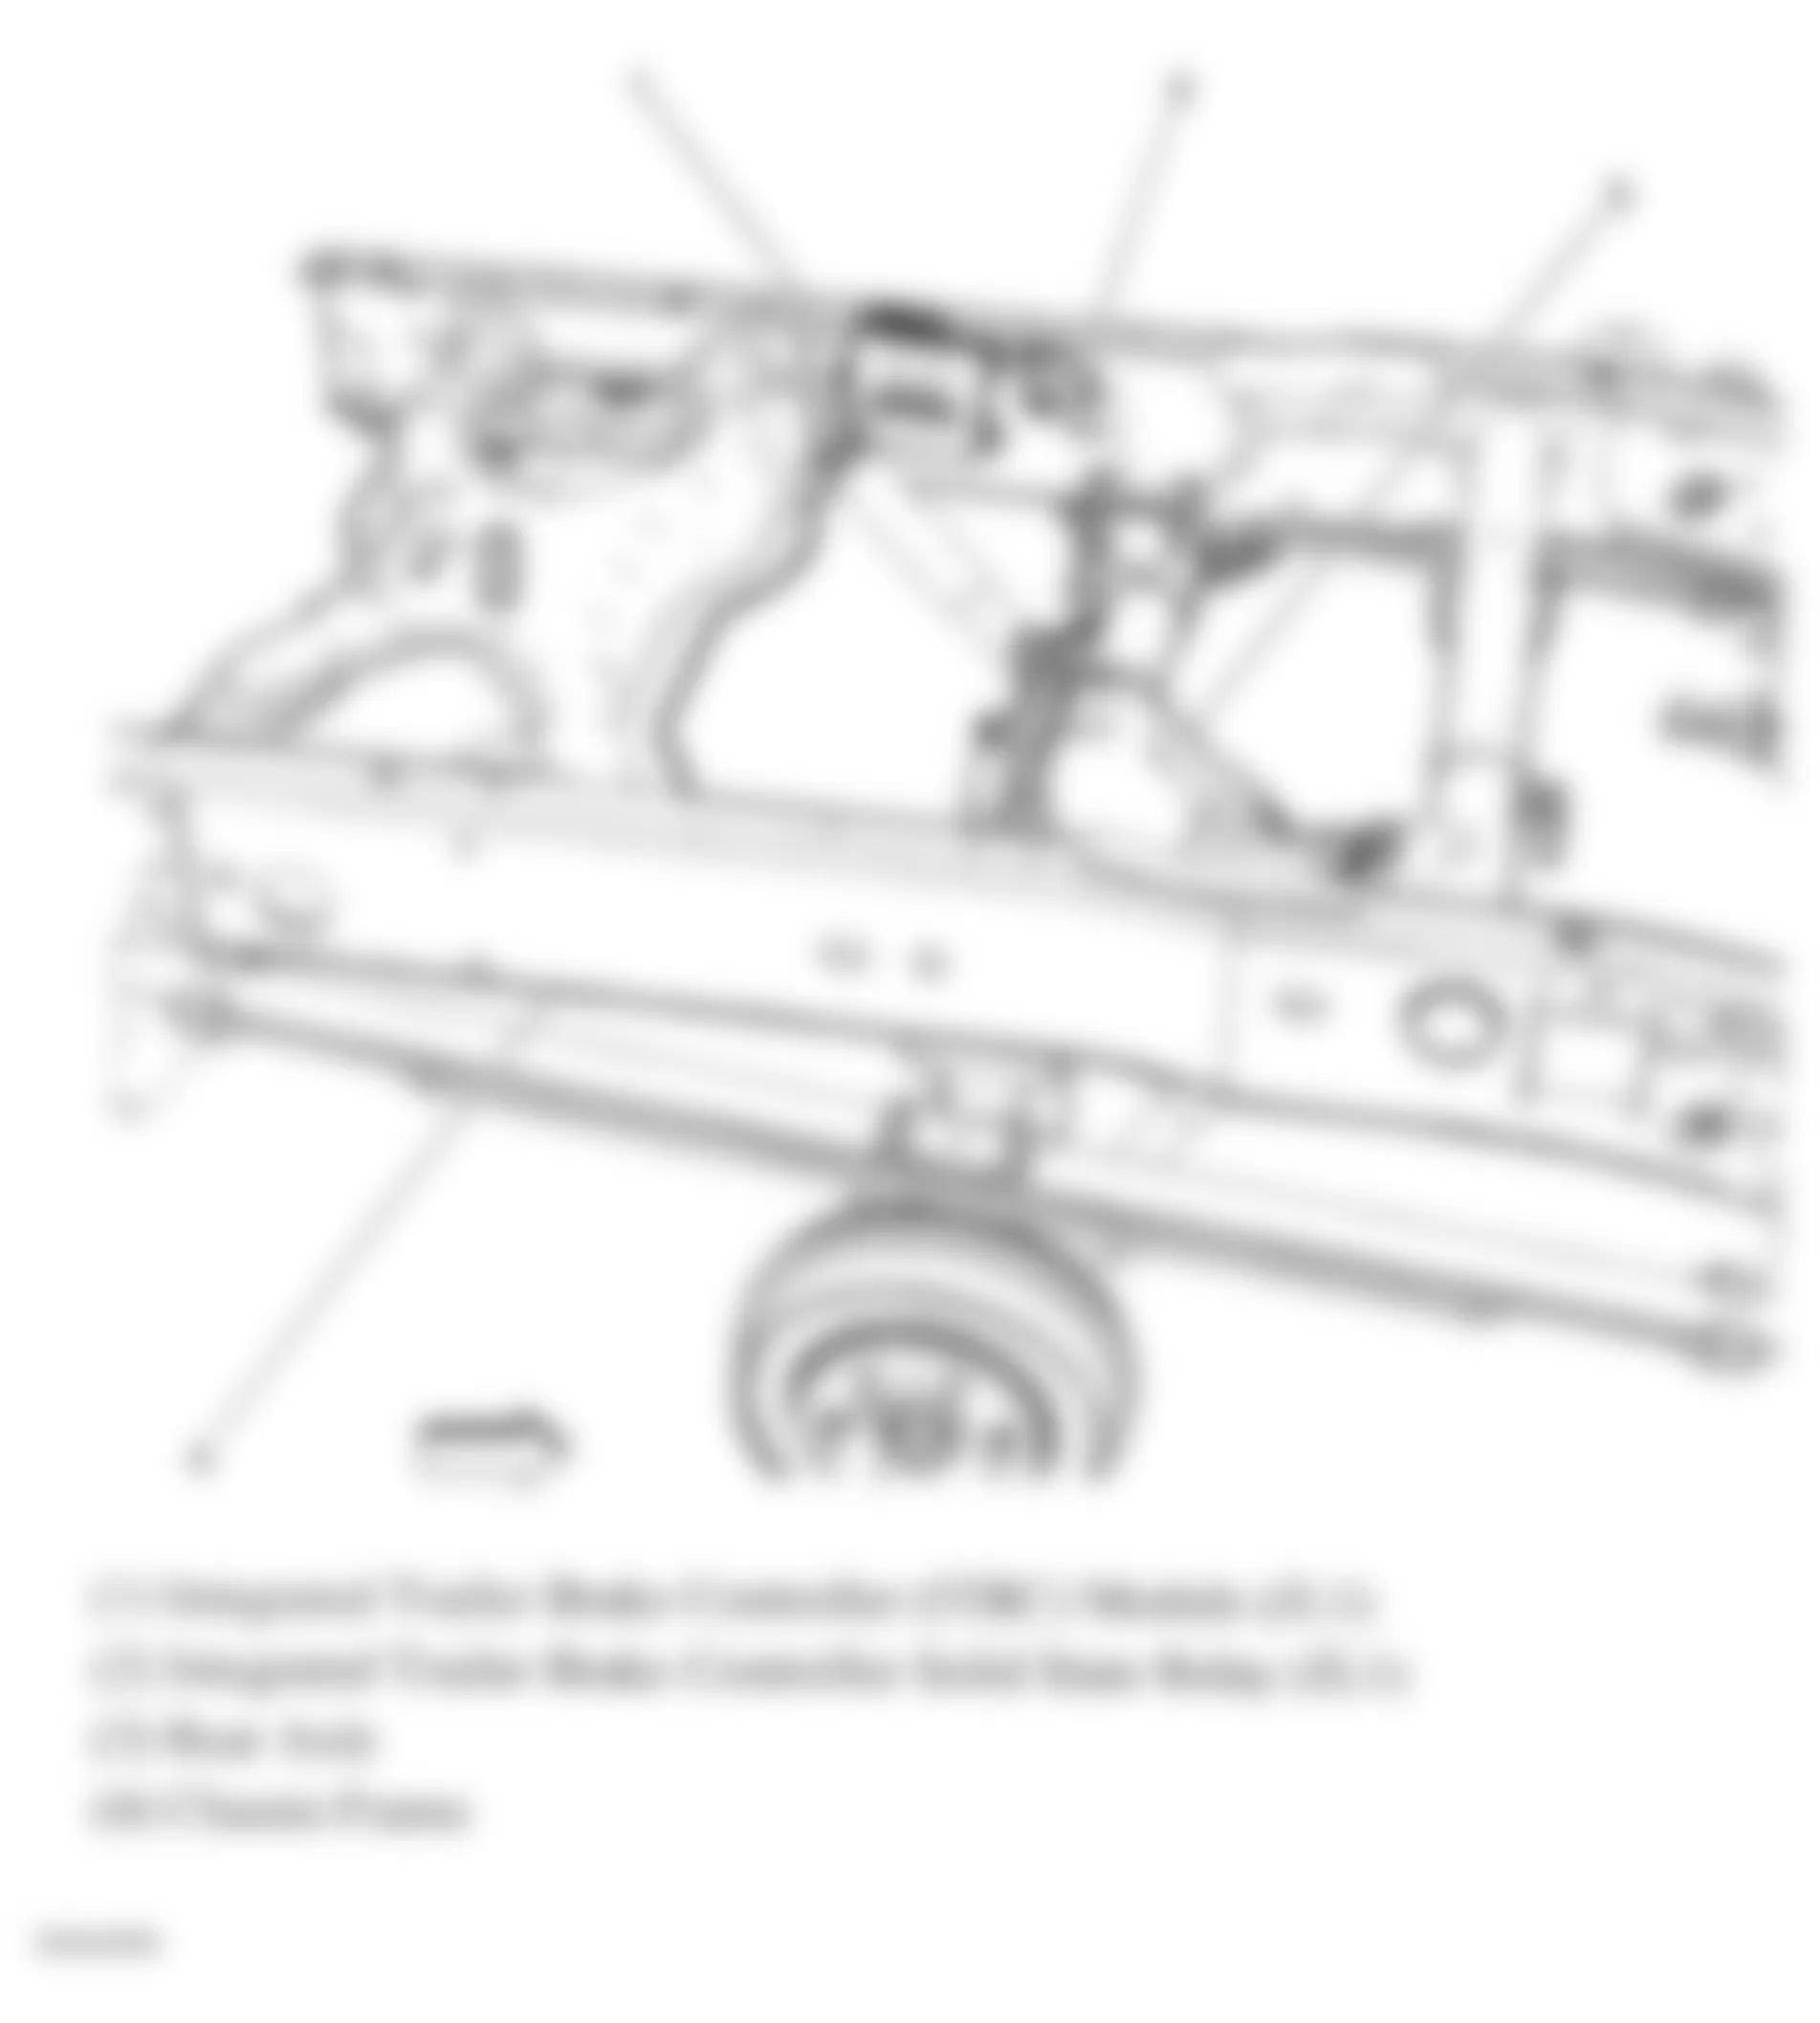 GMC Sierra 3500 HD 2007 - Component Locations -  Rear Of Vehicle